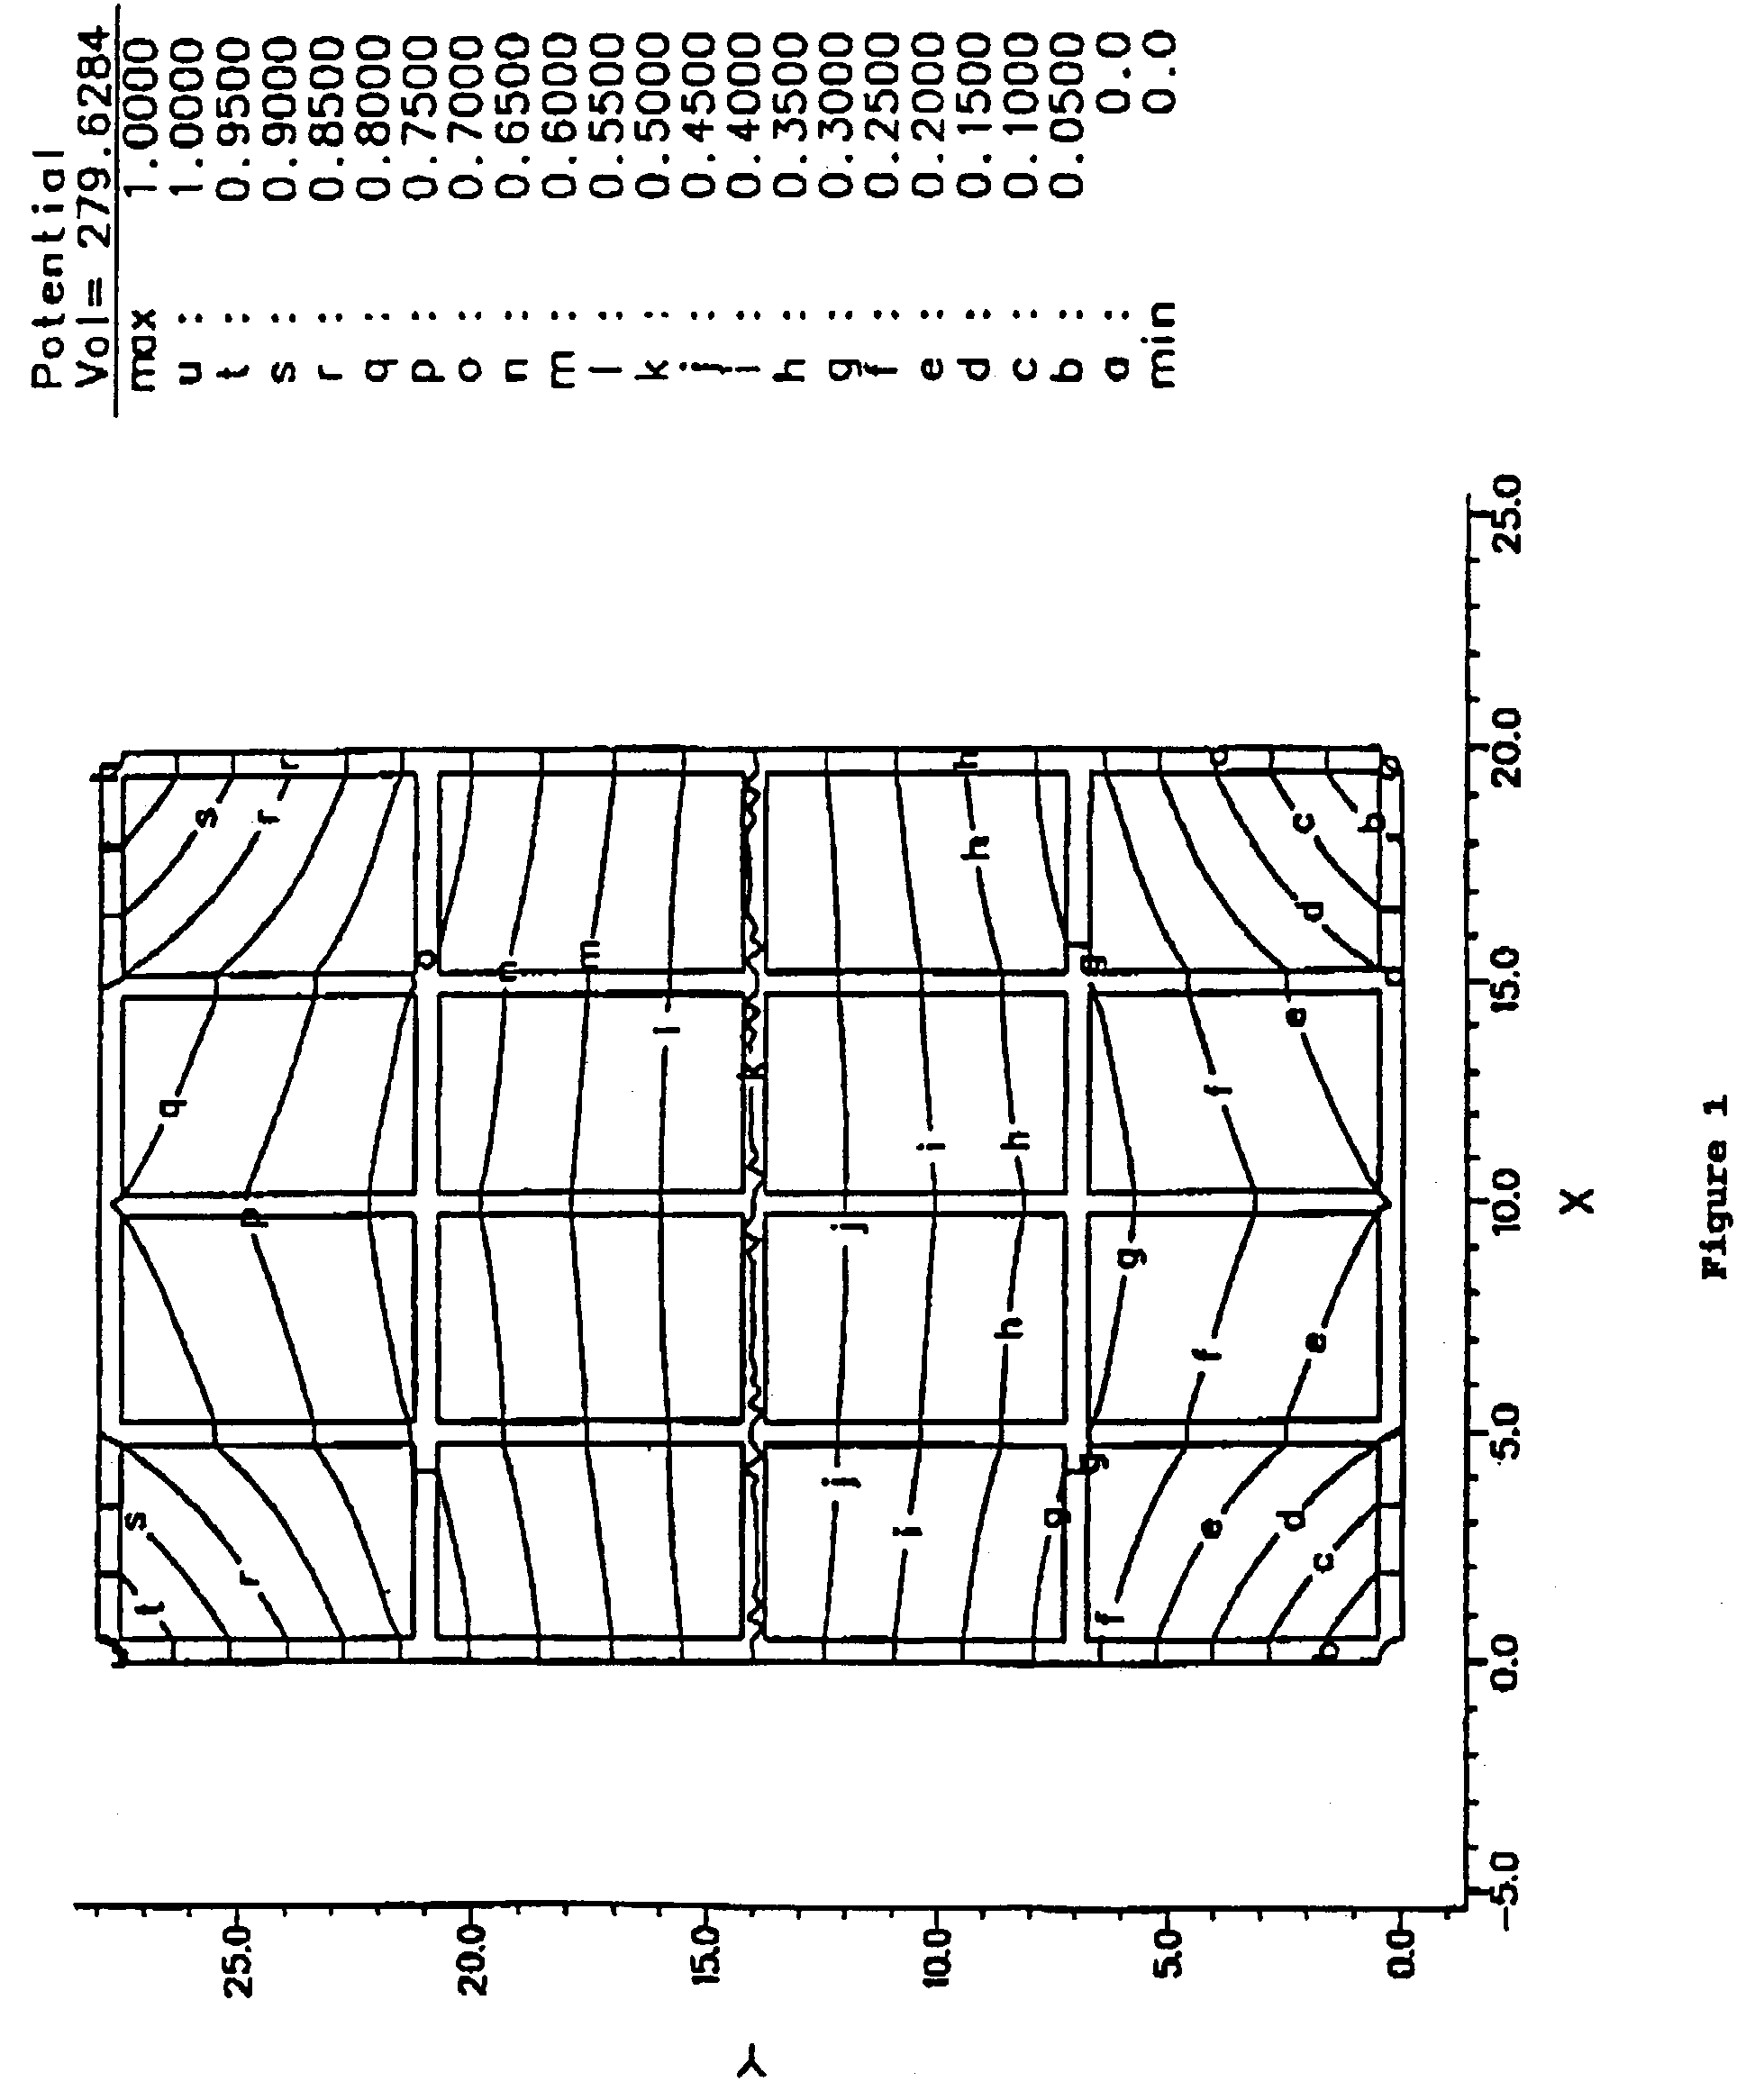 Touch screen with relatively conductive grid